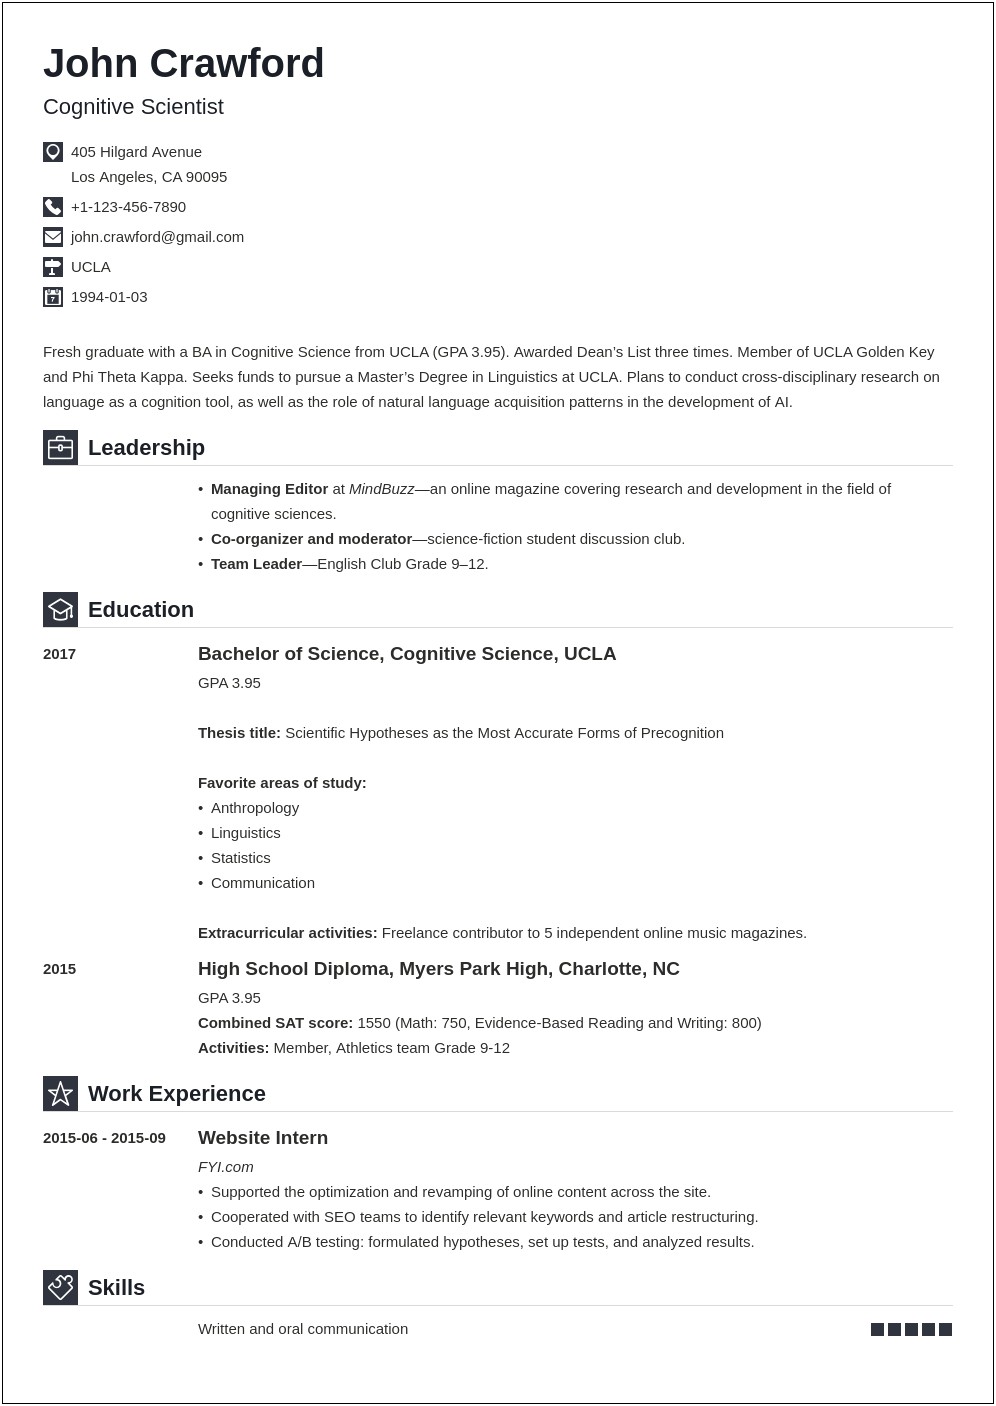 Resume Sample For College Student Pdf